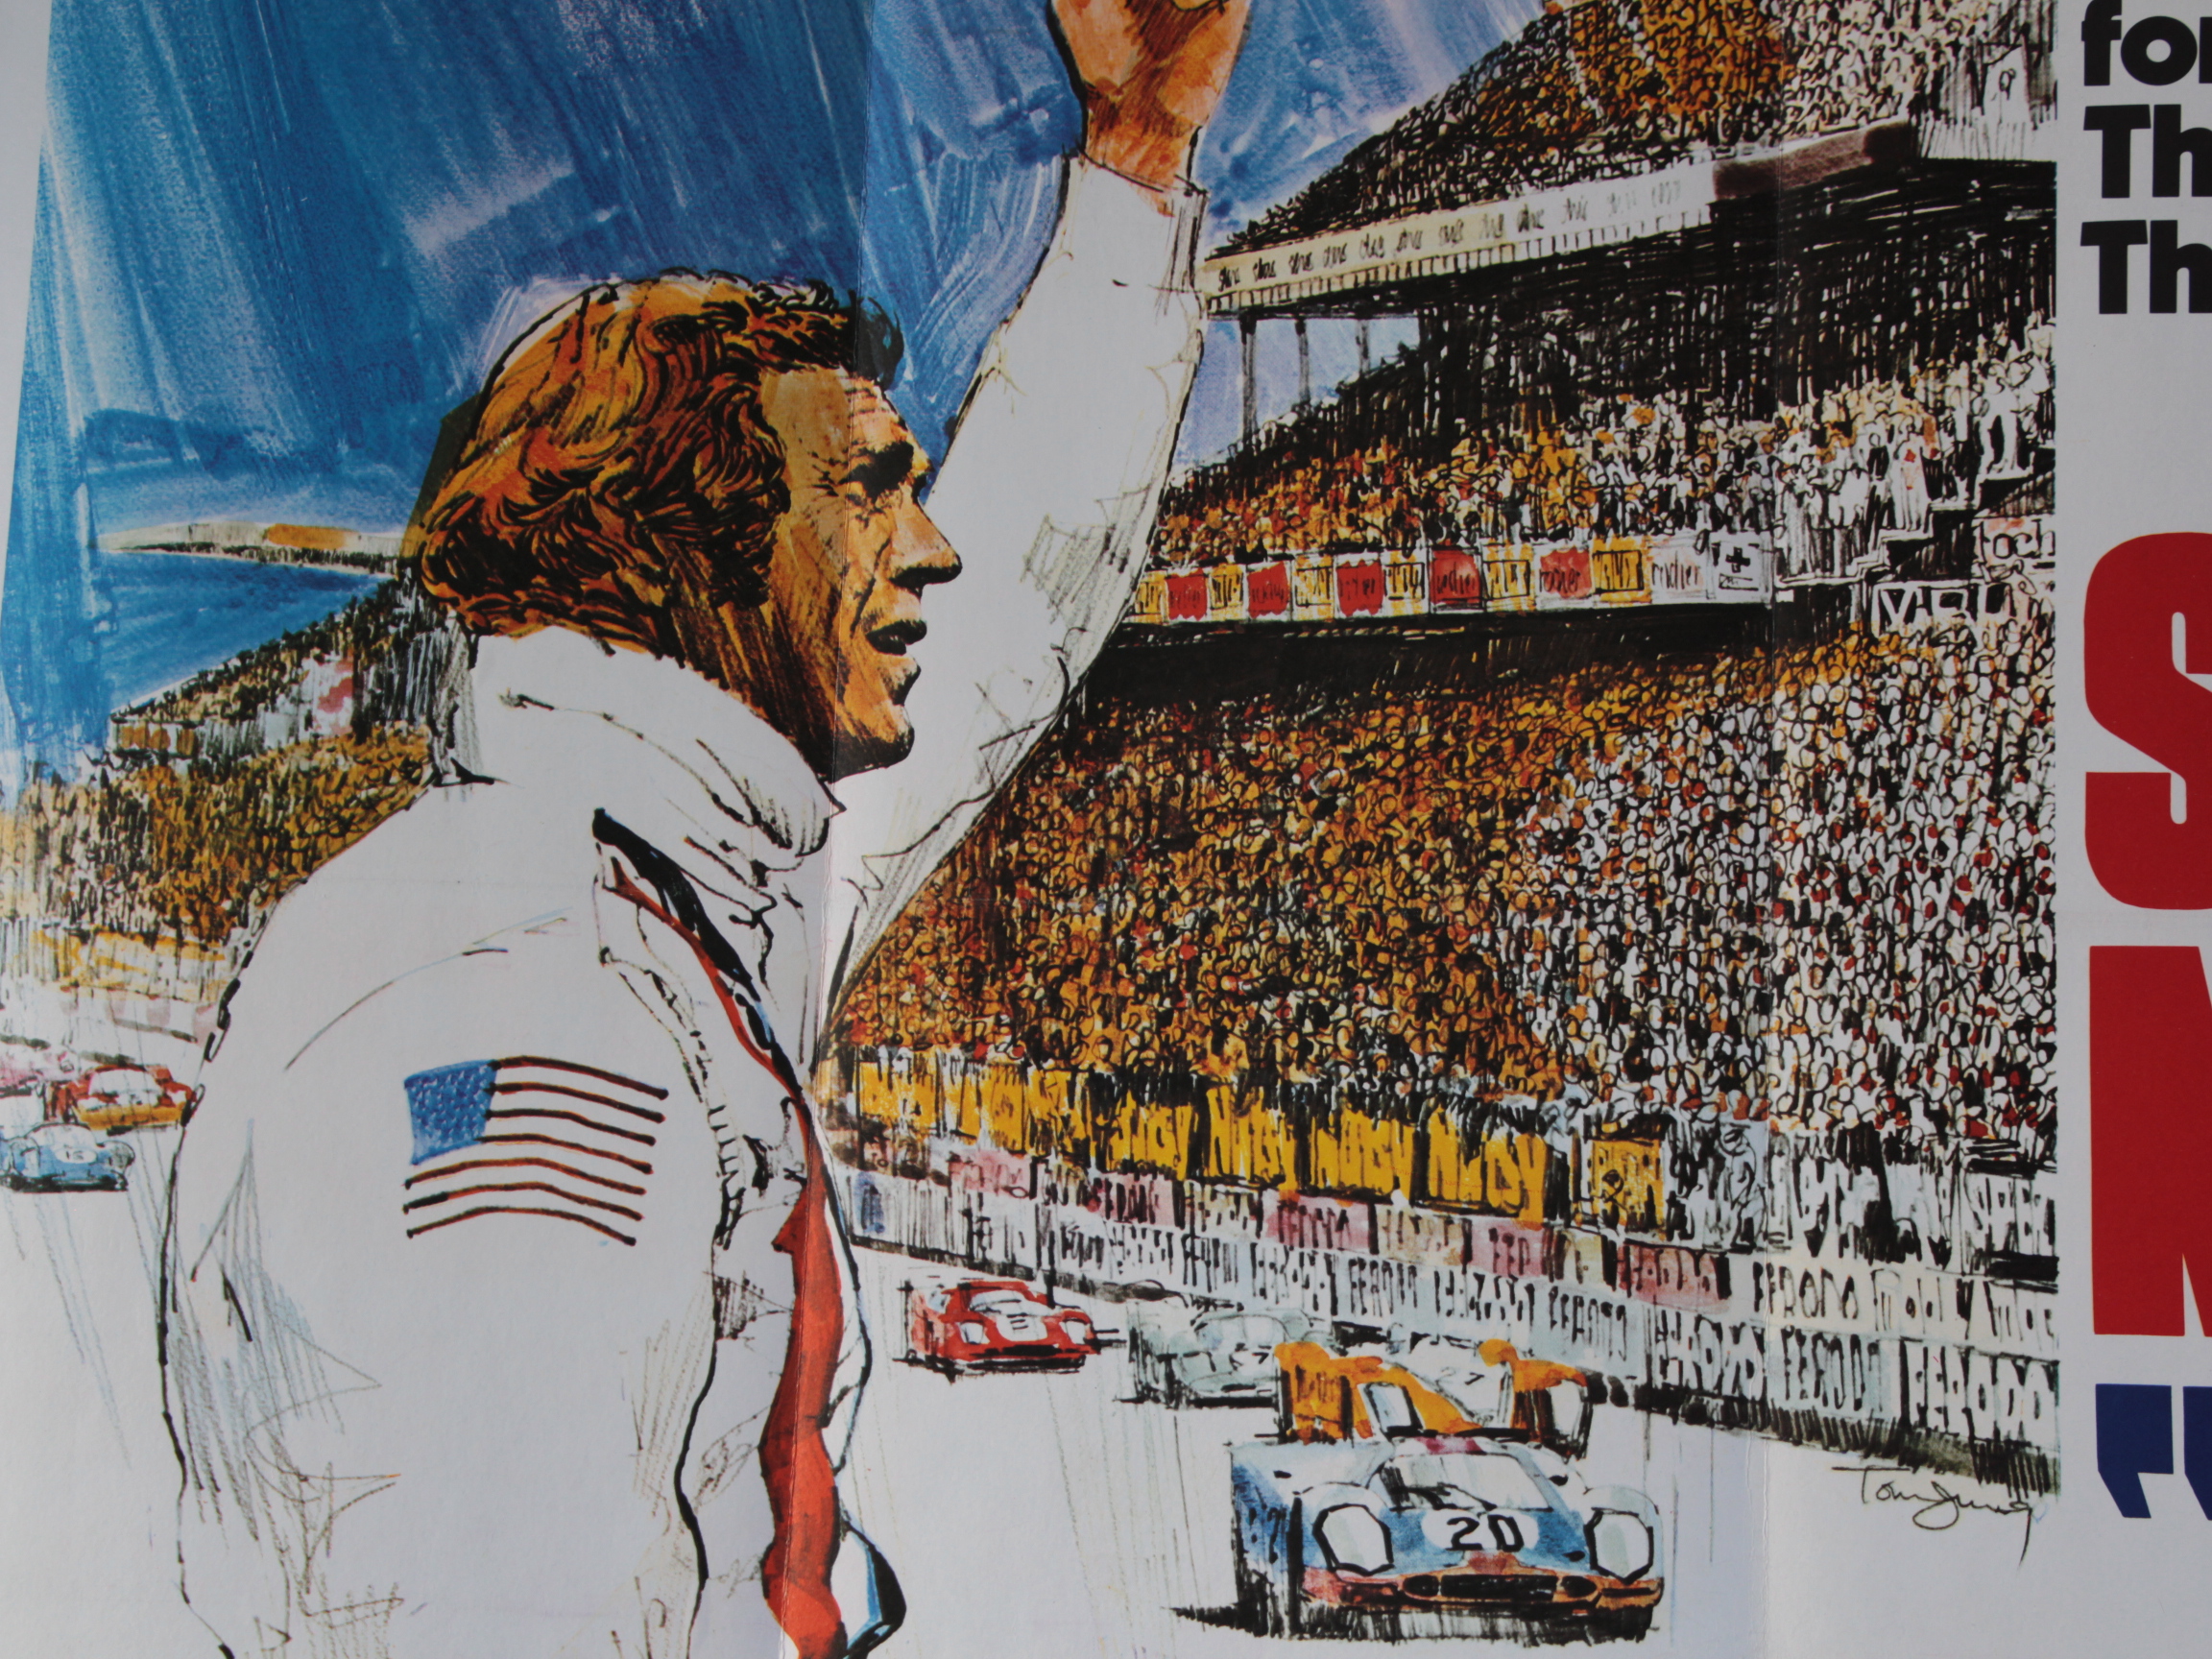 Steve McQueen in Le Mans original linen backed British Quad film poster from 1977 with art by Tom - Image 2 of 3